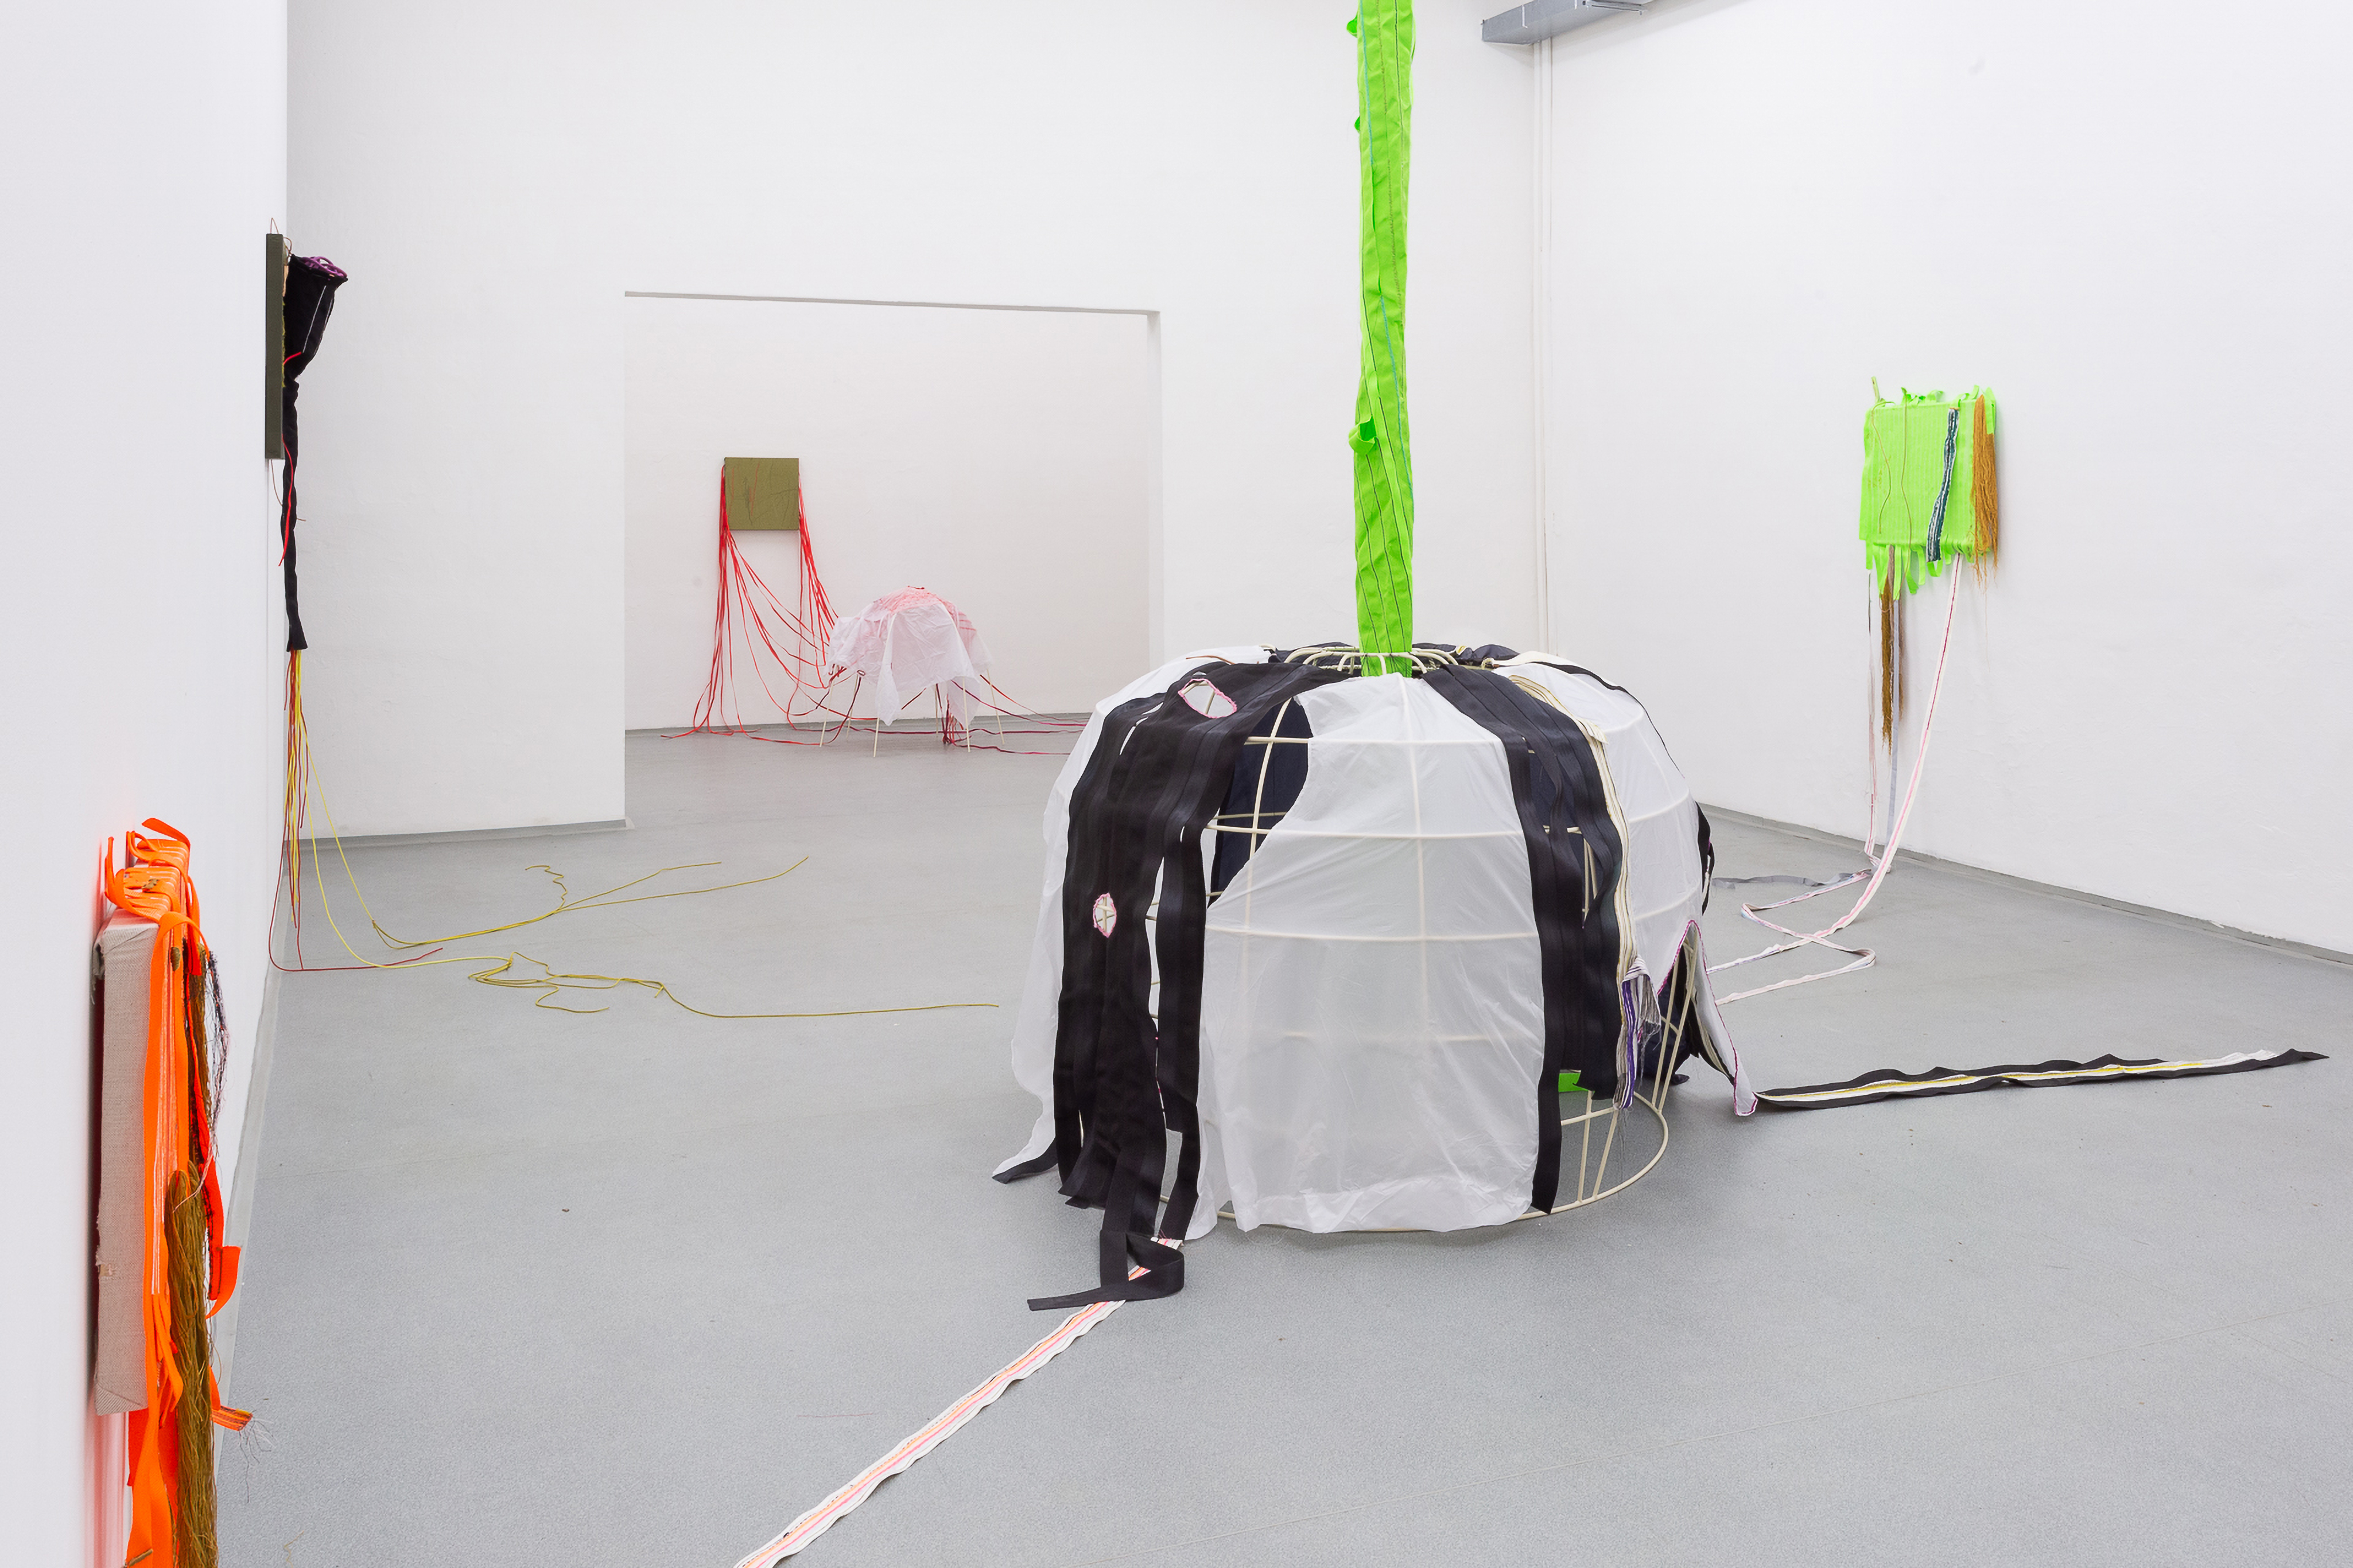 Photo of an art installation called Living Tent by Klára Čermáková (Galerie FaVu, Brno, Czechia, 2018) [Front view]. Front view of the central object of the exhibition (the tent) and the stitched paintings hanging on the walls connected to it.